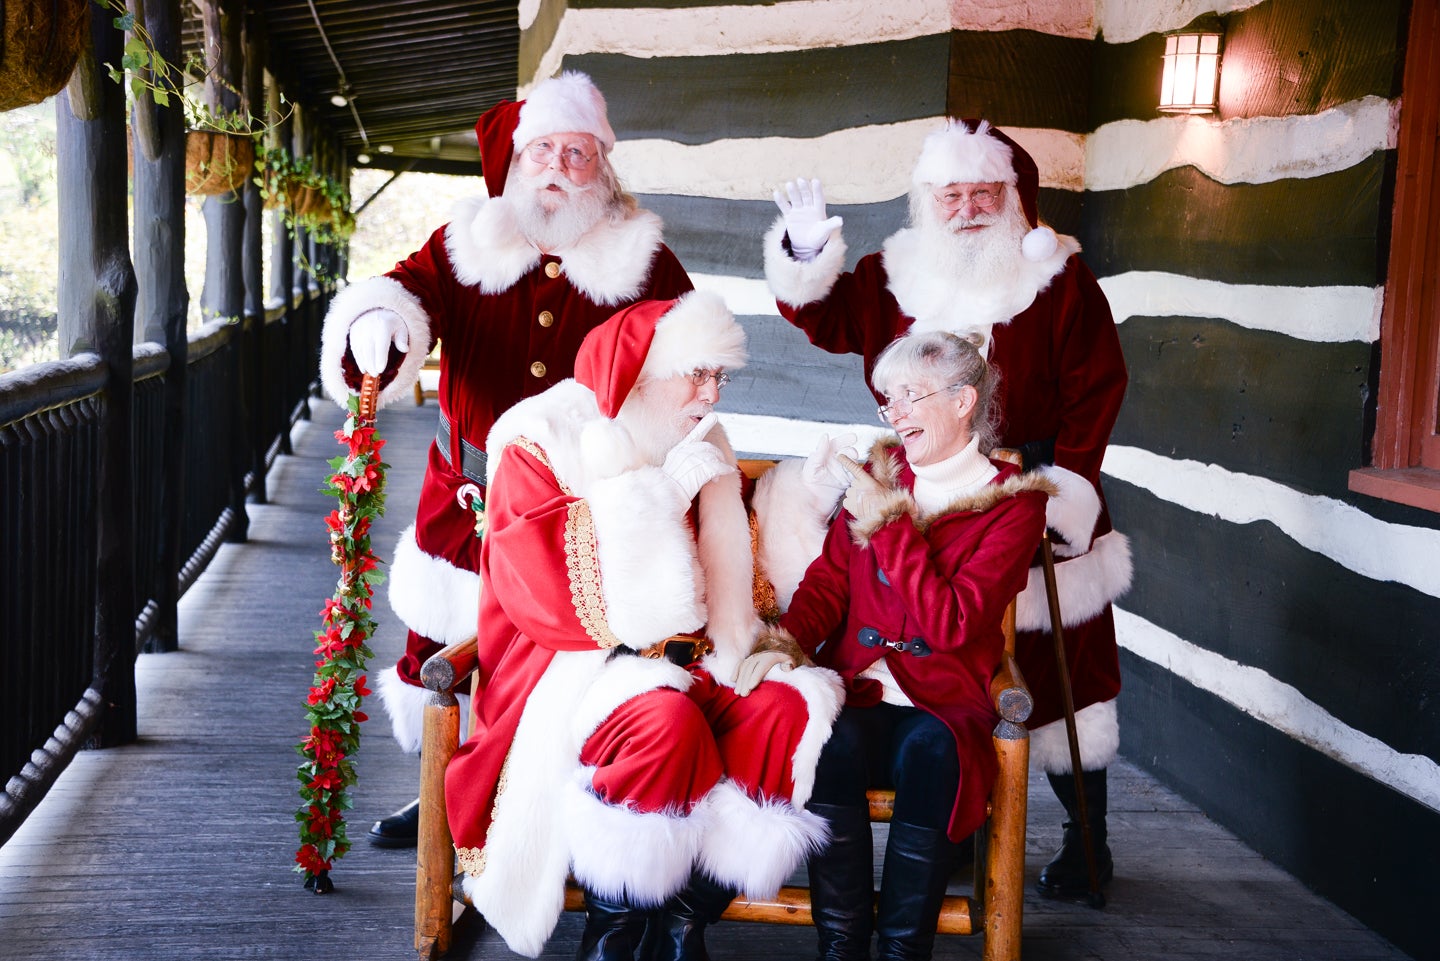 Being Santa: Capital City Clauses working to spread joy to children locally and abroad